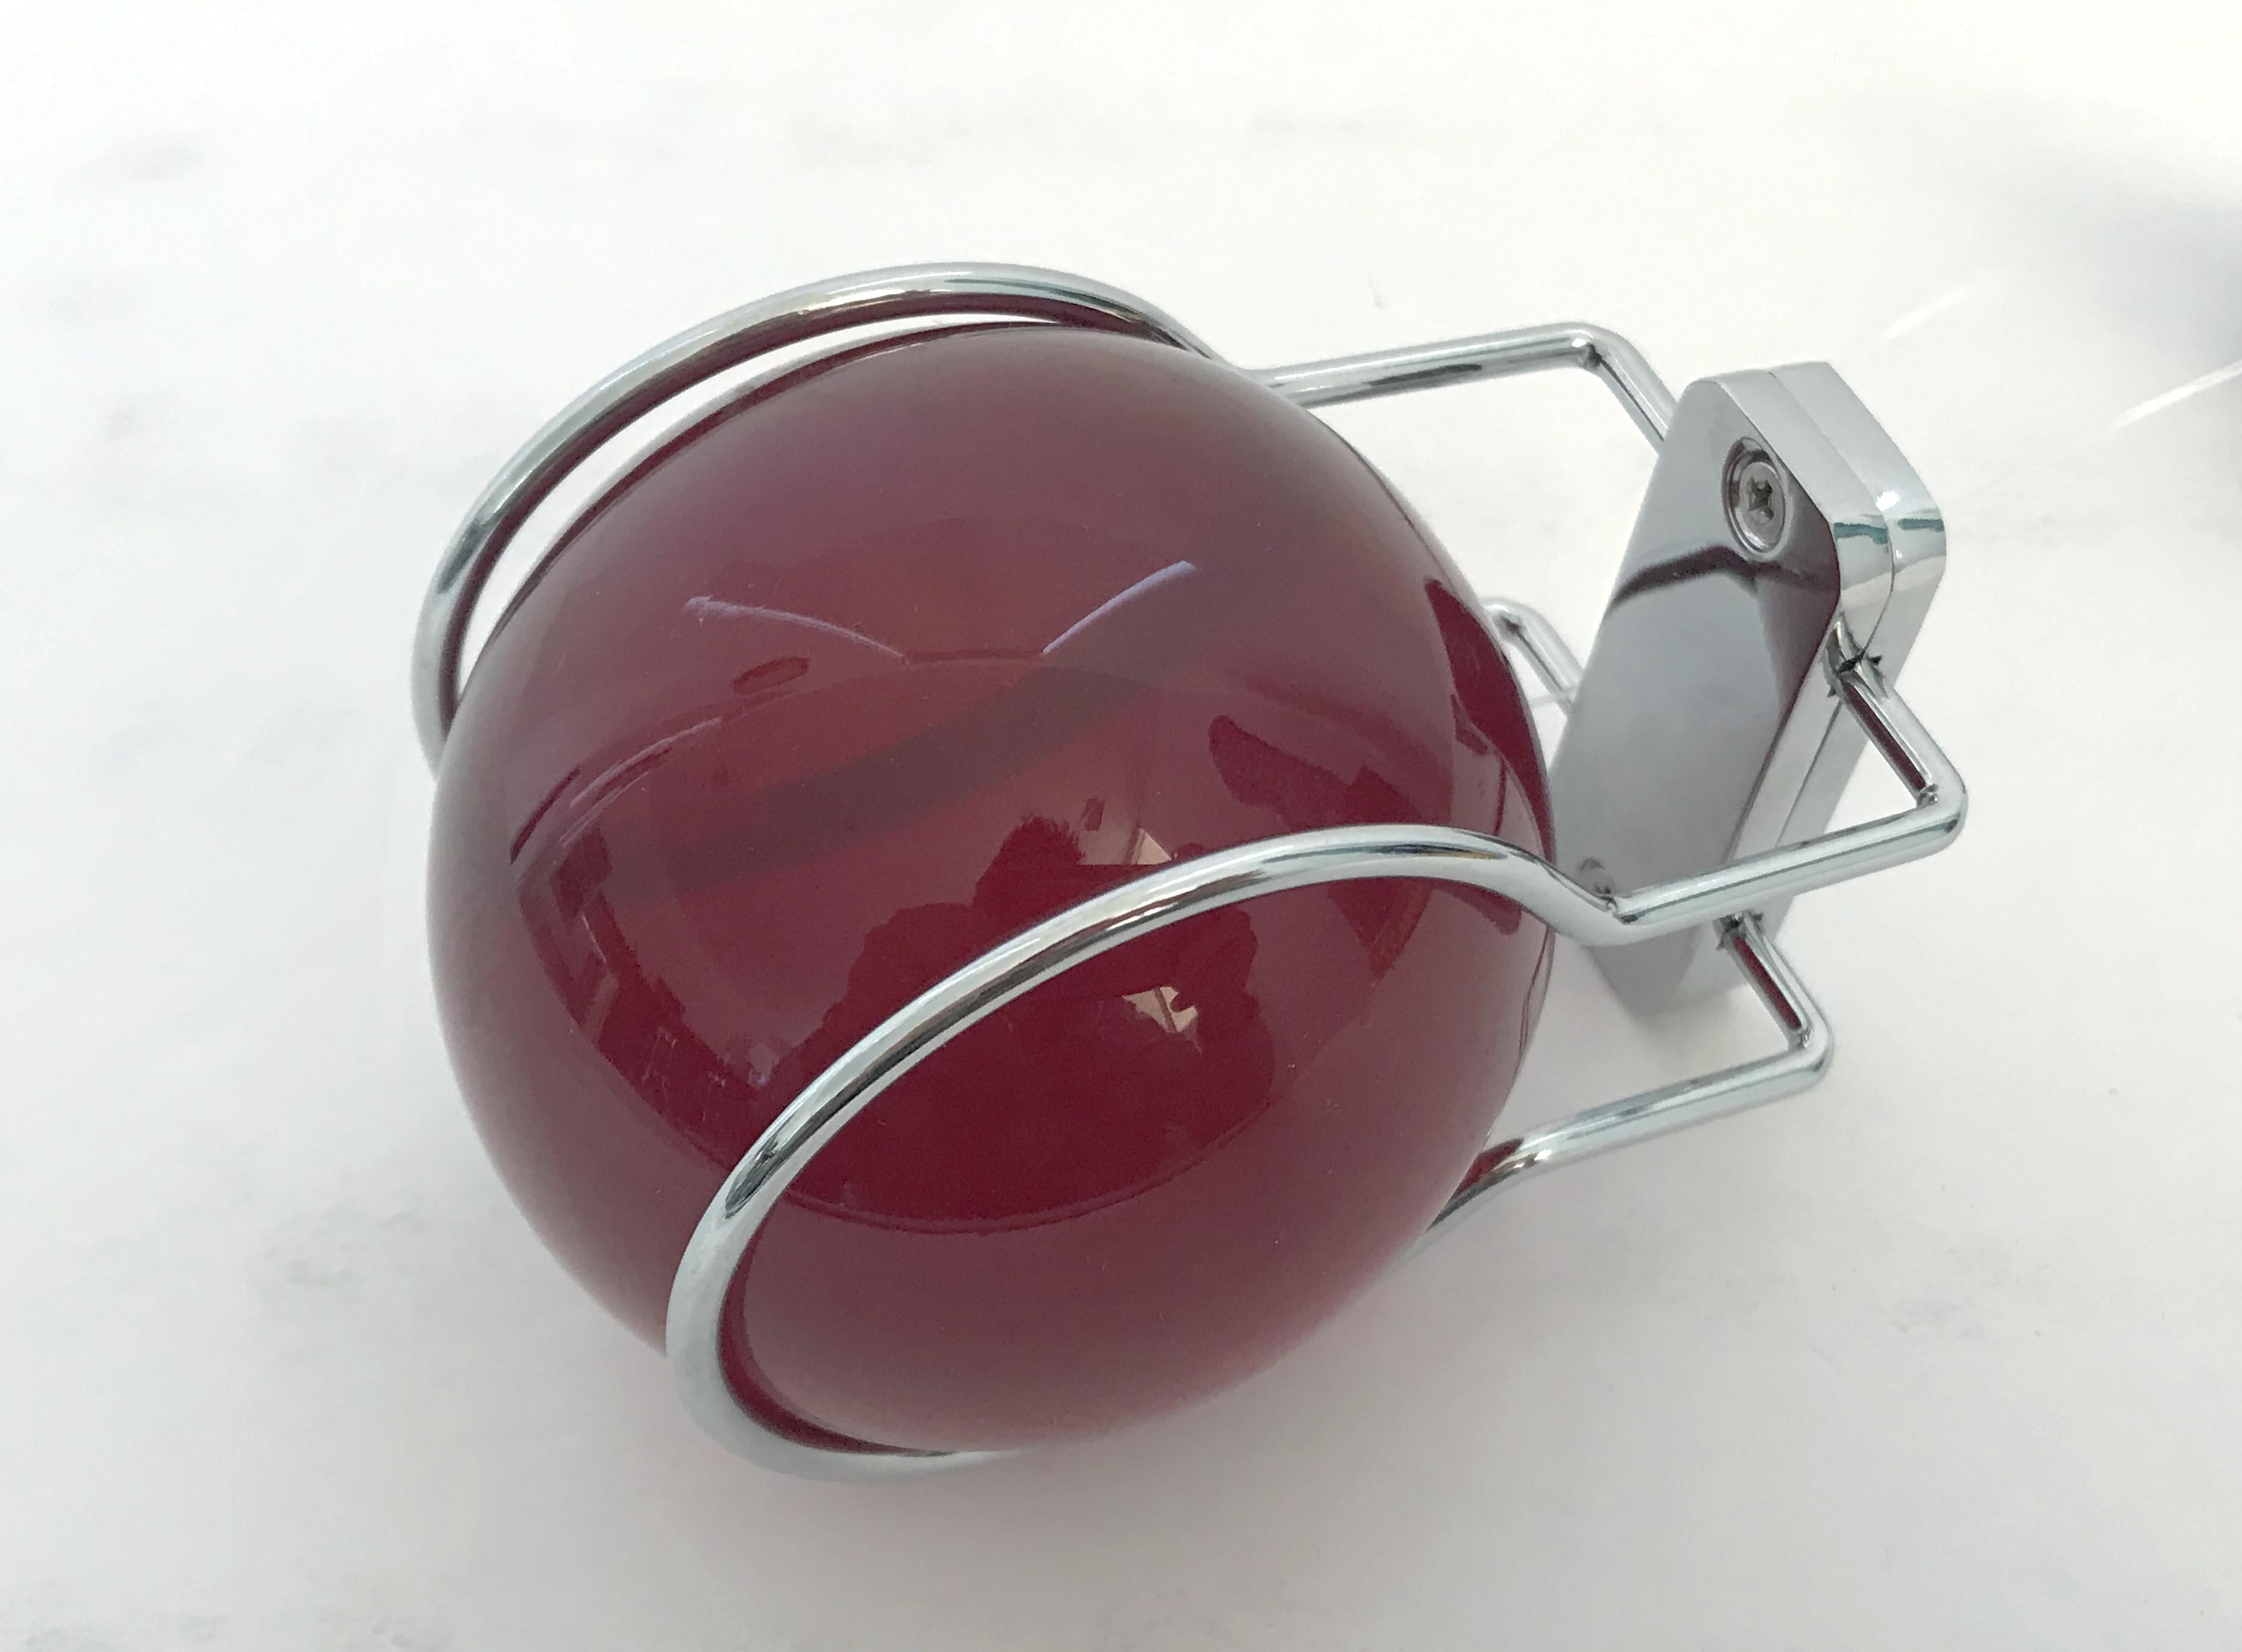 Italian coat or hat hanger with a single red glass ball mounted on chrome bracket / Made in Italy by Fontana Arte, circa 2000s
New and unused, with original tag and package
Measures: Height 2.75 inches, width 2.75 inches , depth 3.5 inches
1 in